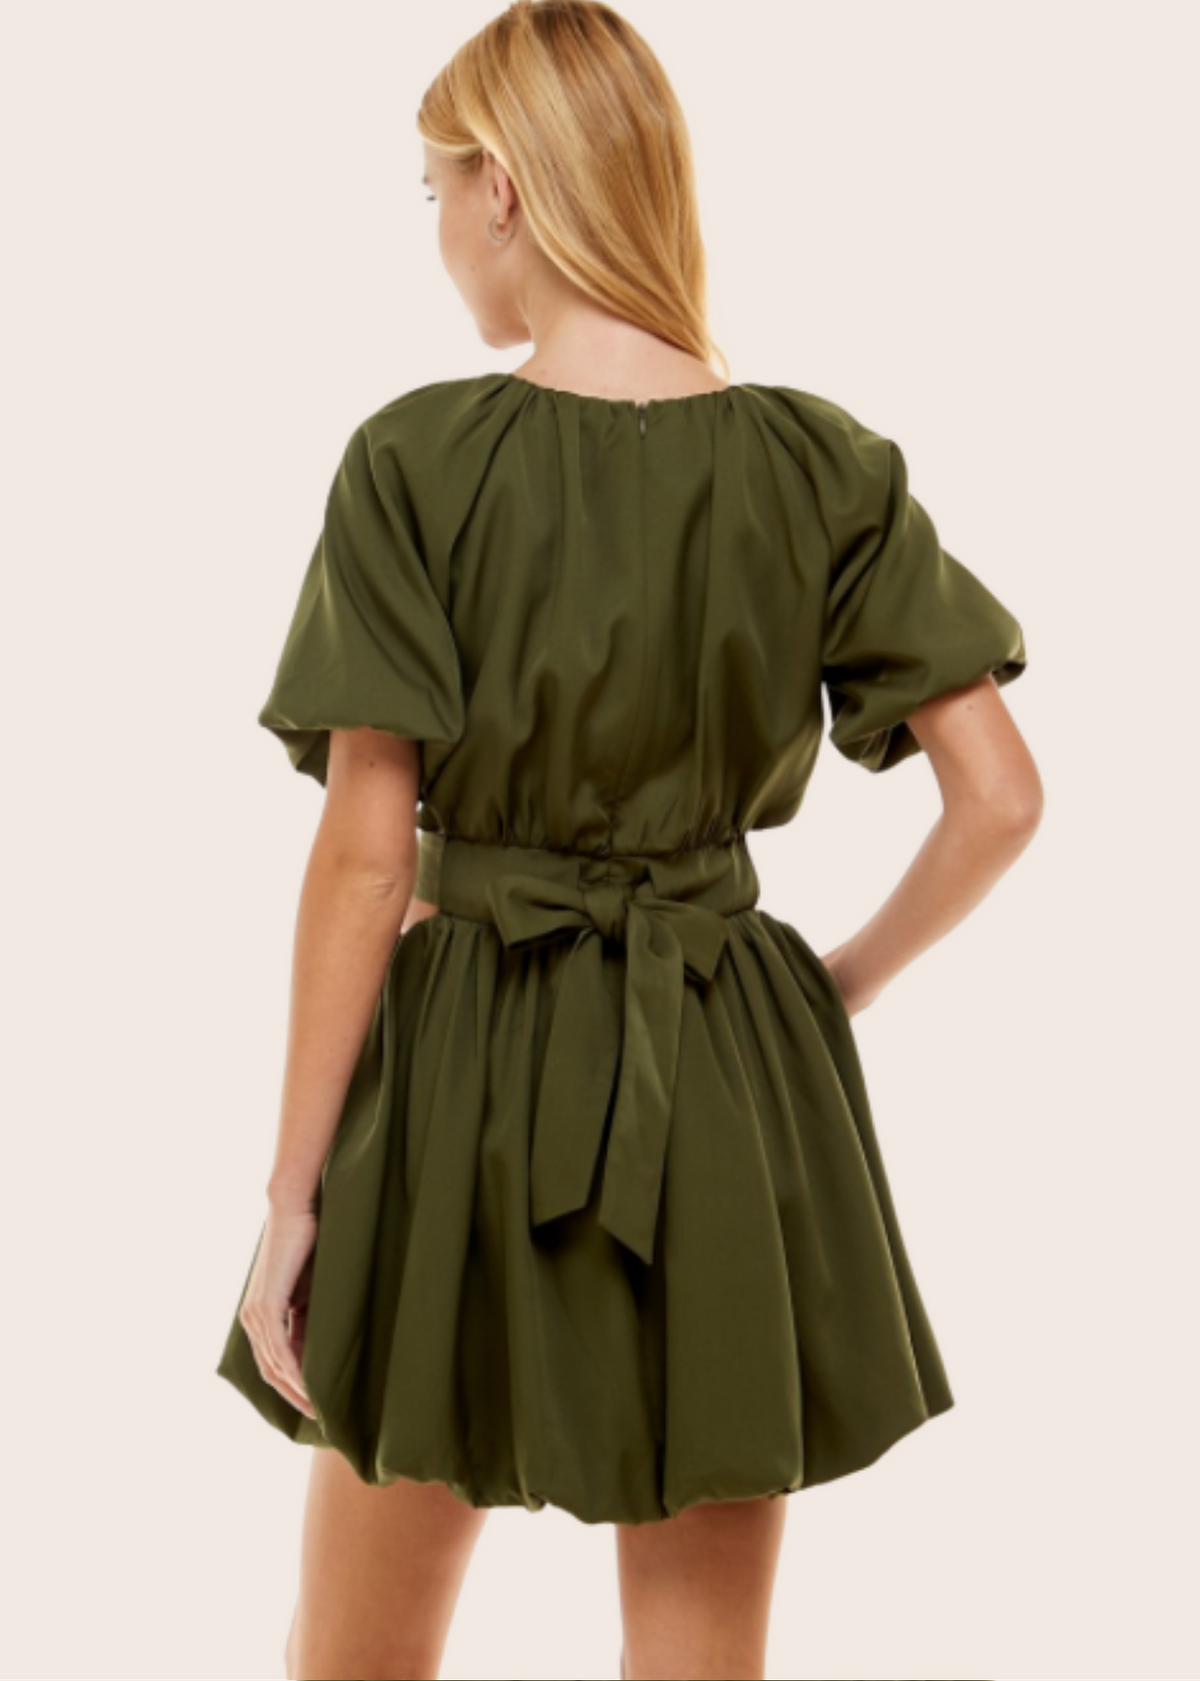 Emerald Goddess - Bodice Cut Out Mini Dress with Puffed Sleeves